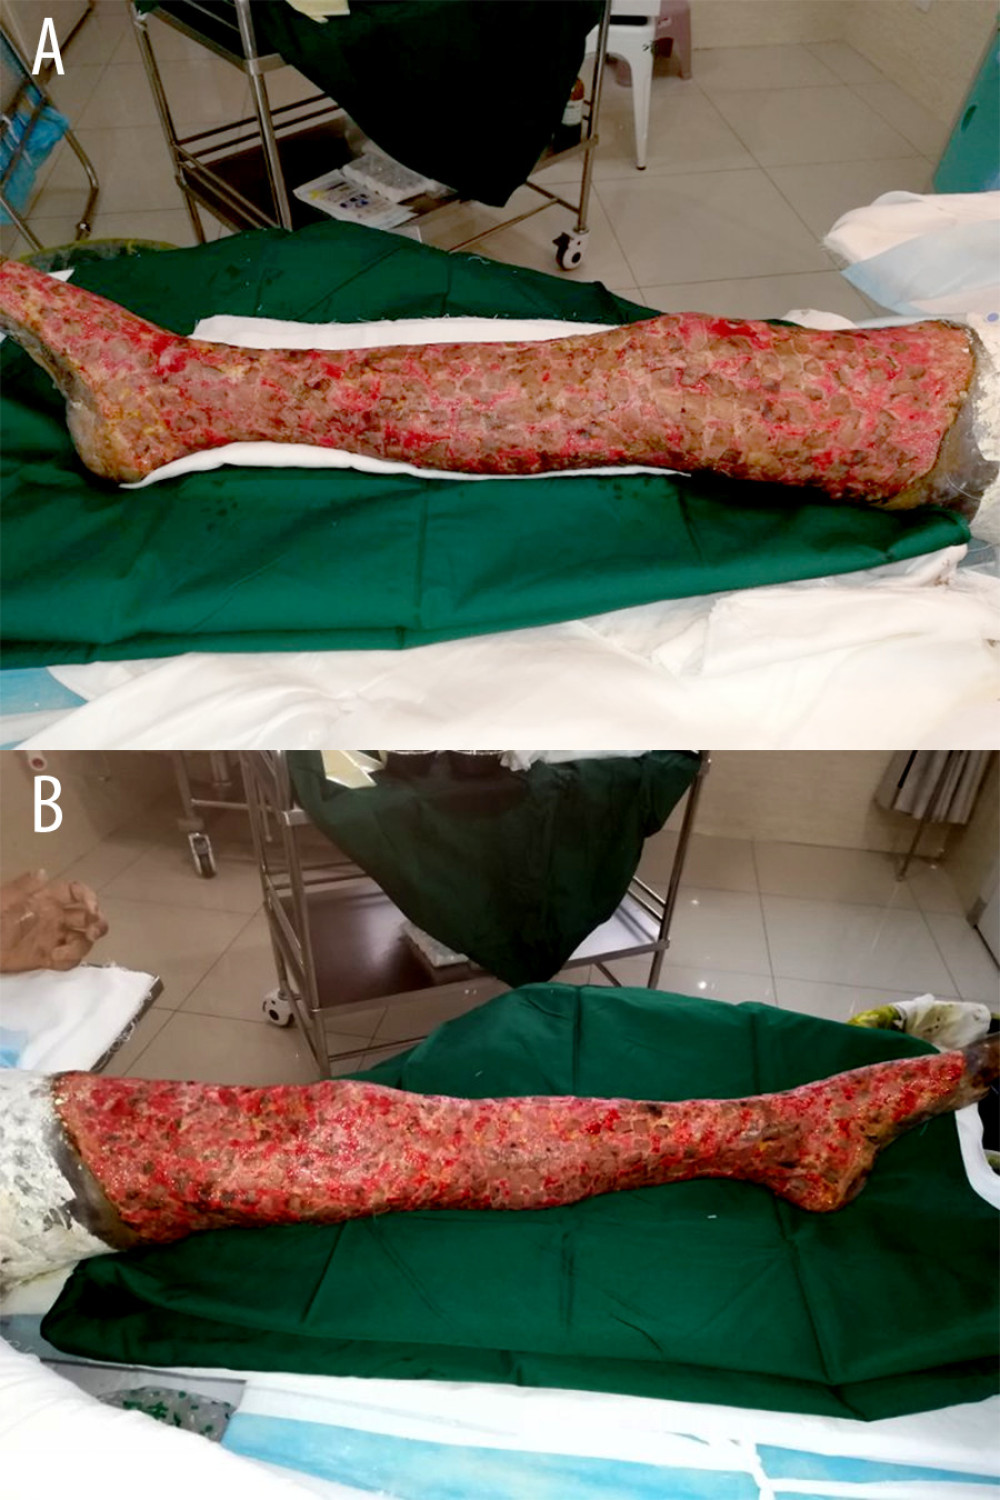 Skin graft 1 week after the operation. (A, B) The skin grafts took well 1 week after the operation, and the take rate of skin grafting was almost 100%.